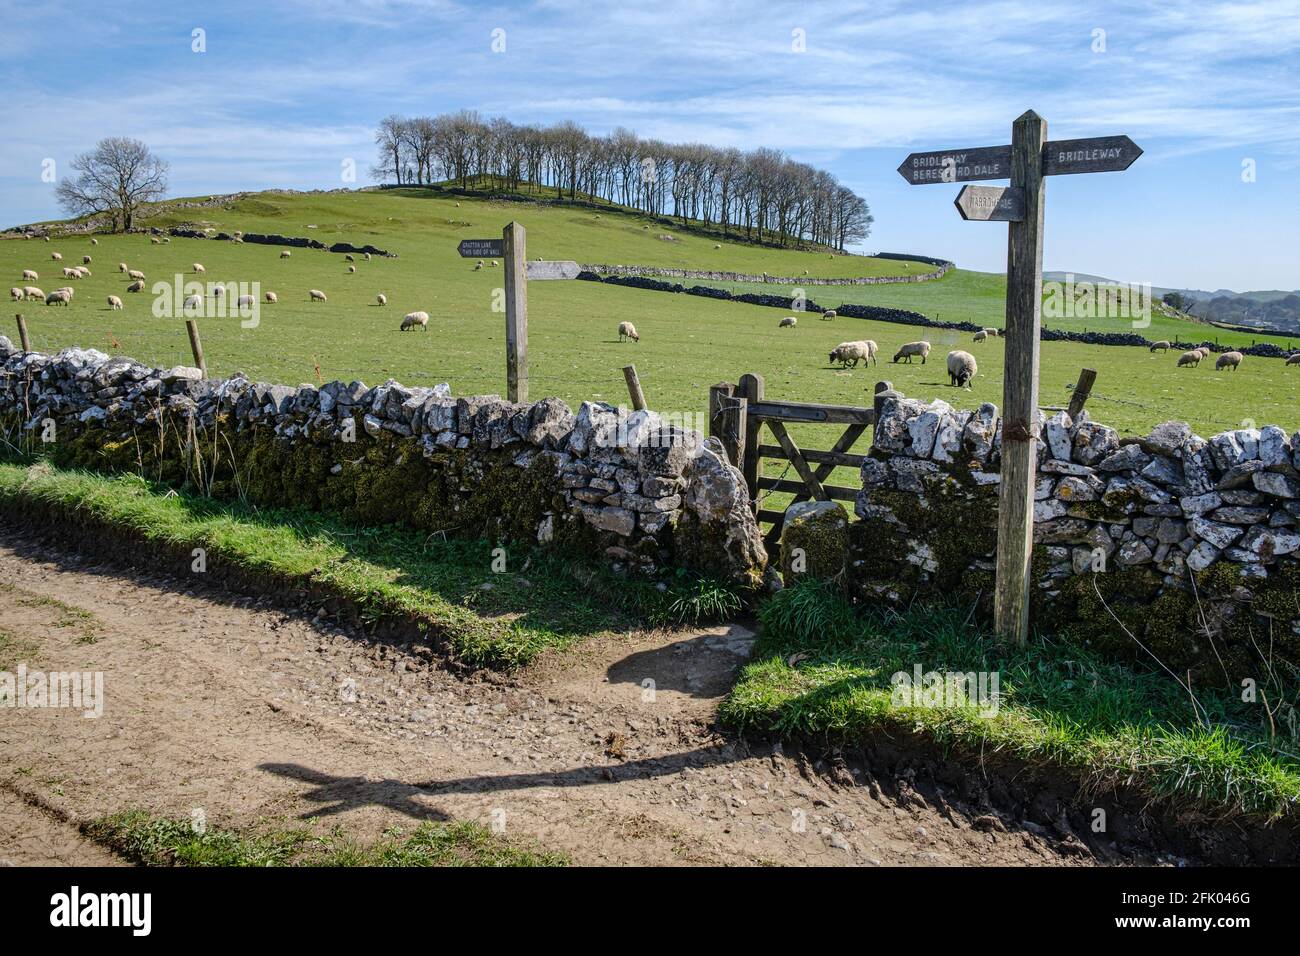 Bridleway and footpath near Alstonefield, Peak District National Park, Staffordshire Stock Photo